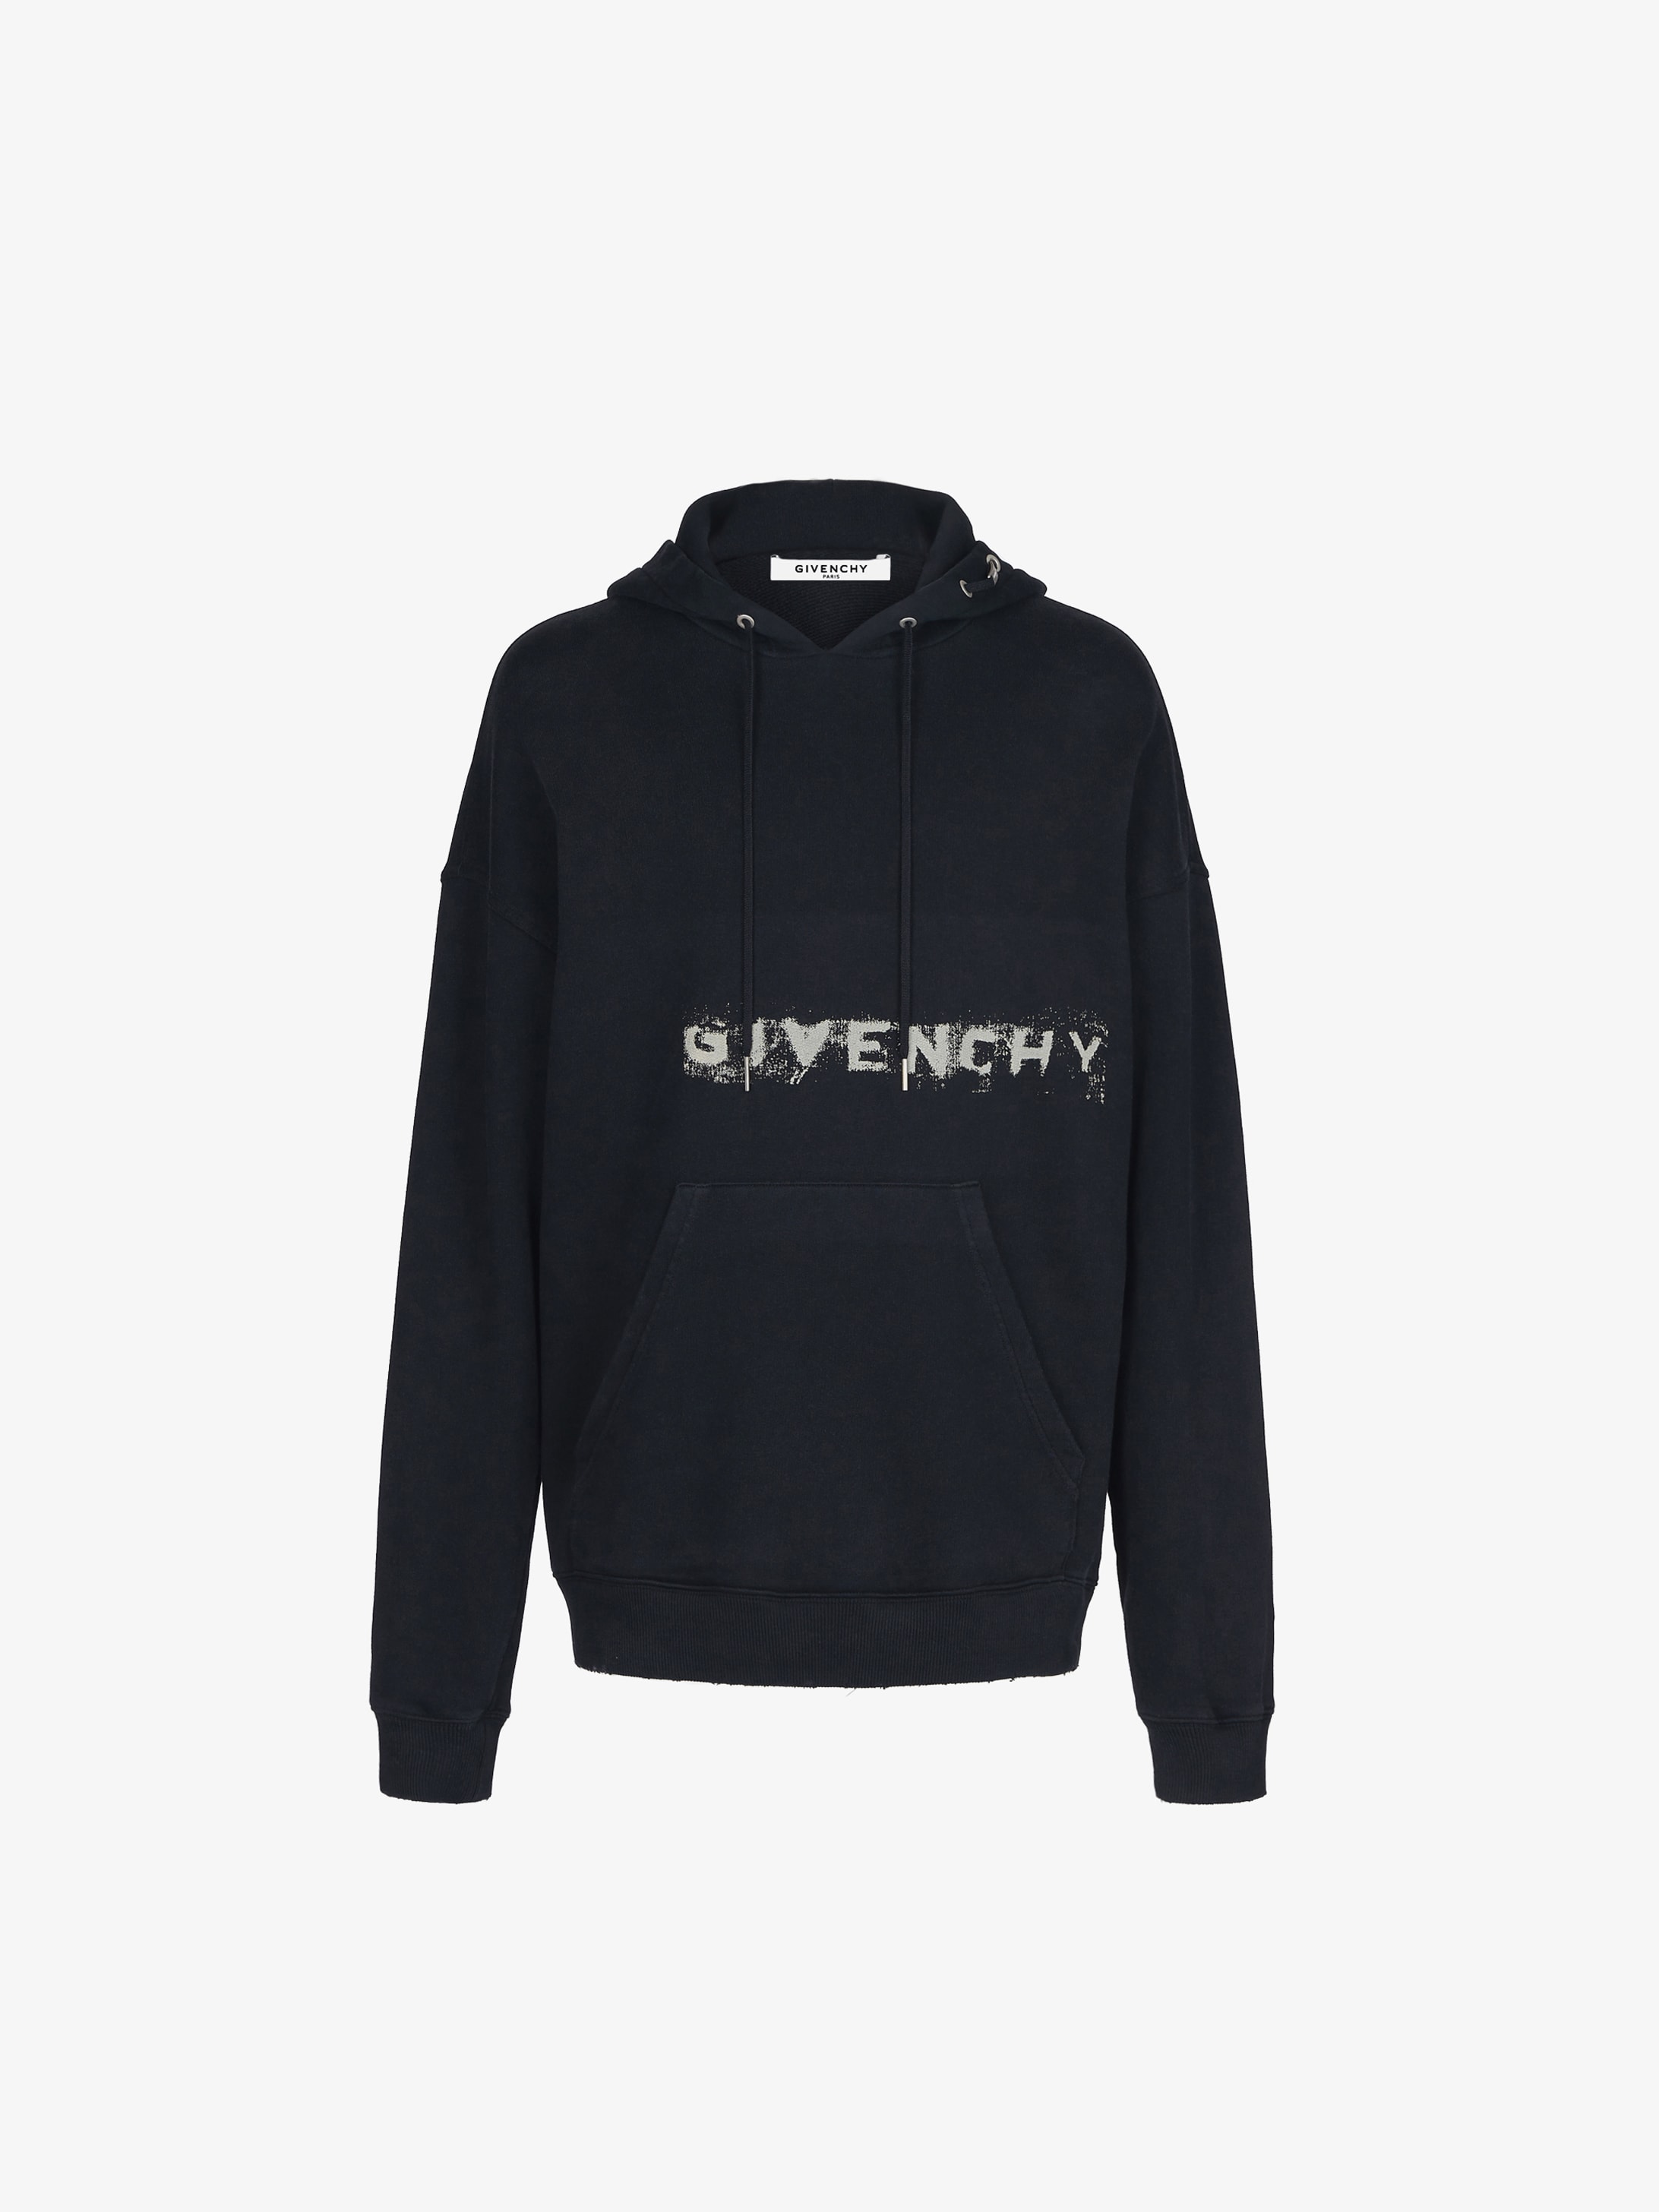 GIVENCHY faded hoodie | GIVENCHY Paris